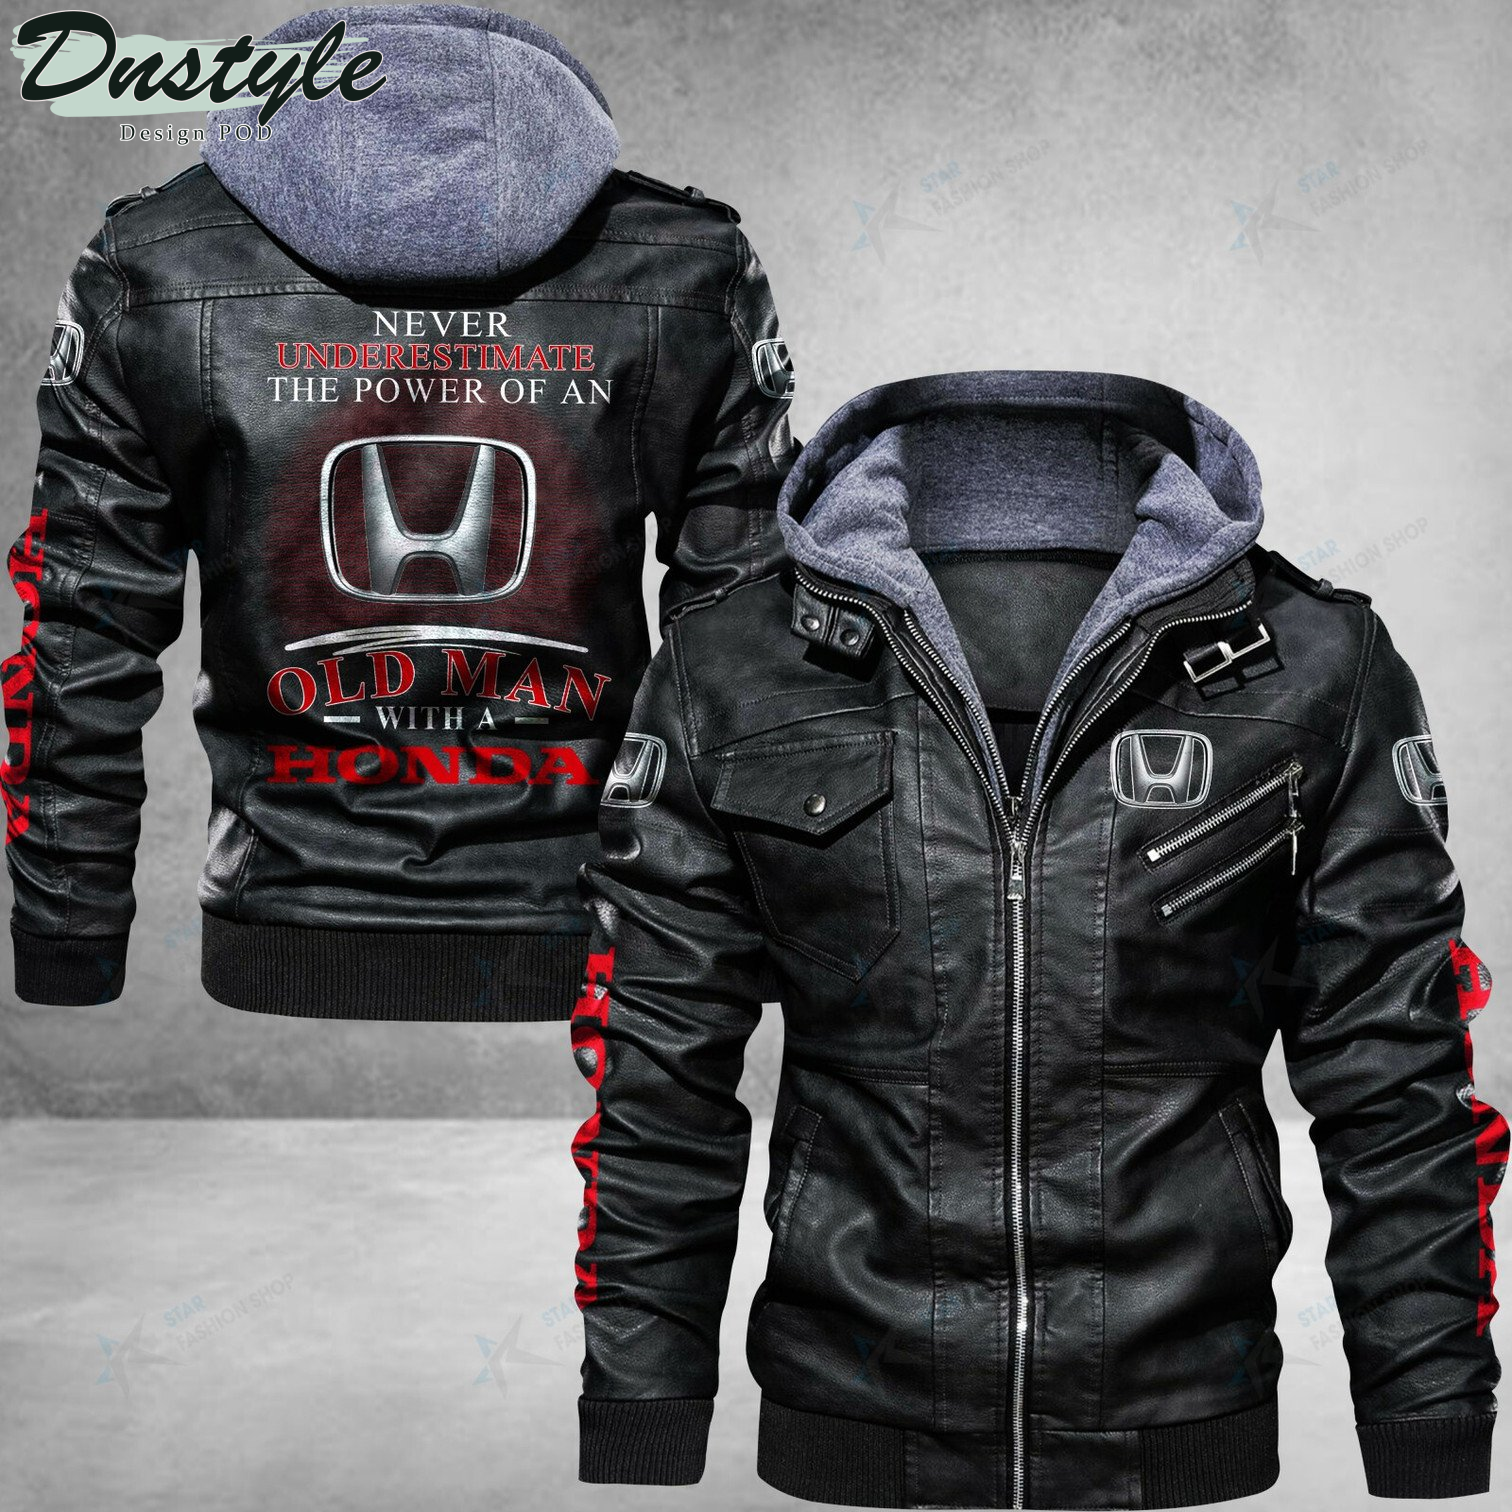 Honda never underestimate the power of an old man leather jacket